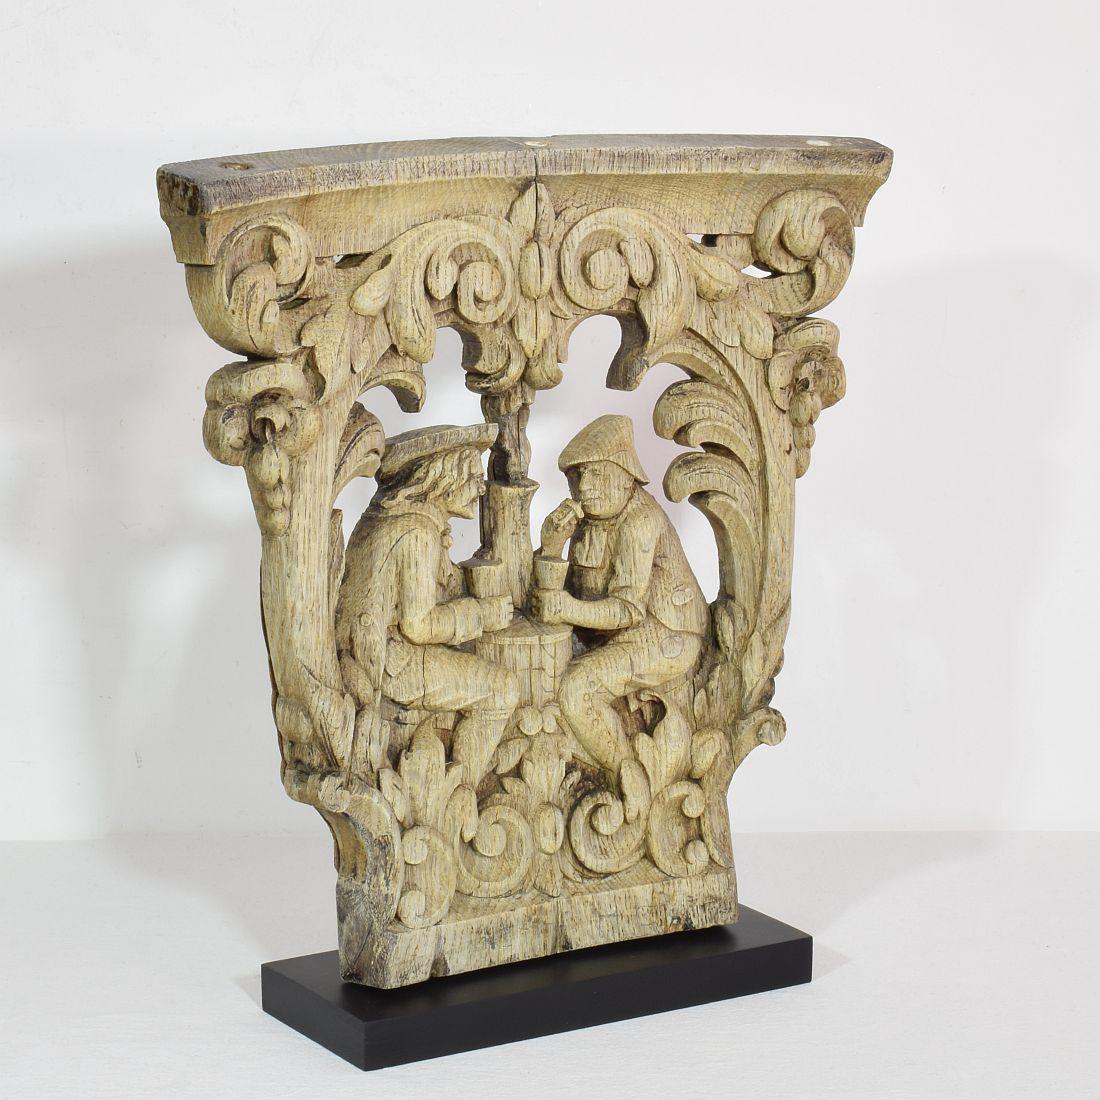 French Provincial 18th / 19th Century French Weathered Oak Capital with Figures